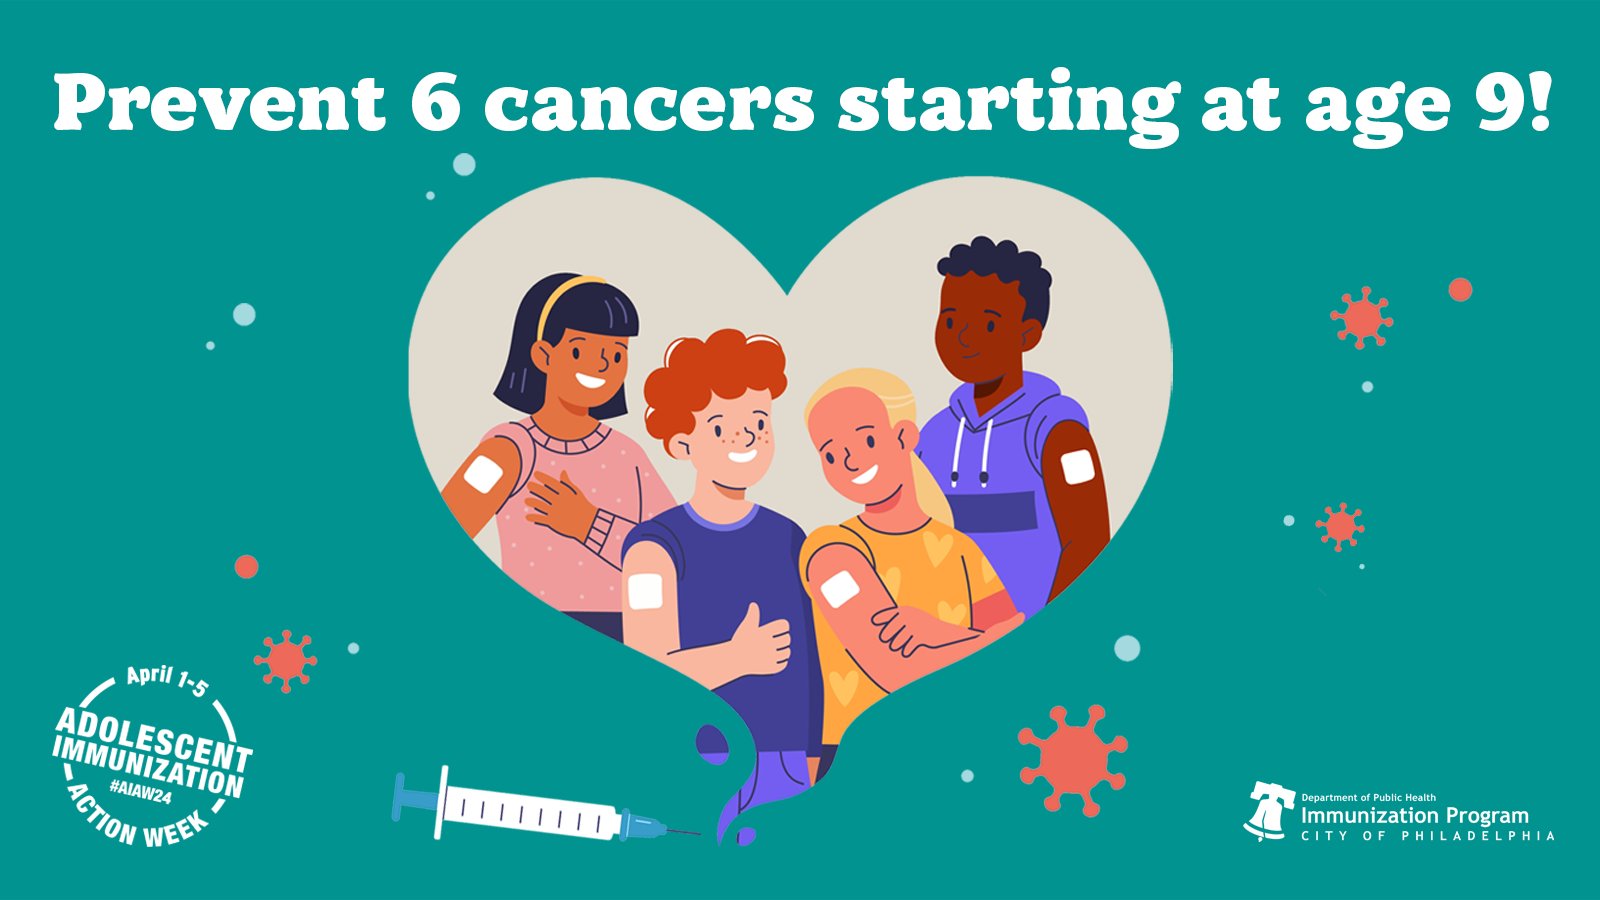 Philadelphia Public Health on X: It's Adolescent Immunization Action Week!  About 40% of teenagers aren't fully vaccinated against HPV, which can cause  cancer. Protect yourself and future generations—get vaxxed. Learn more:   #